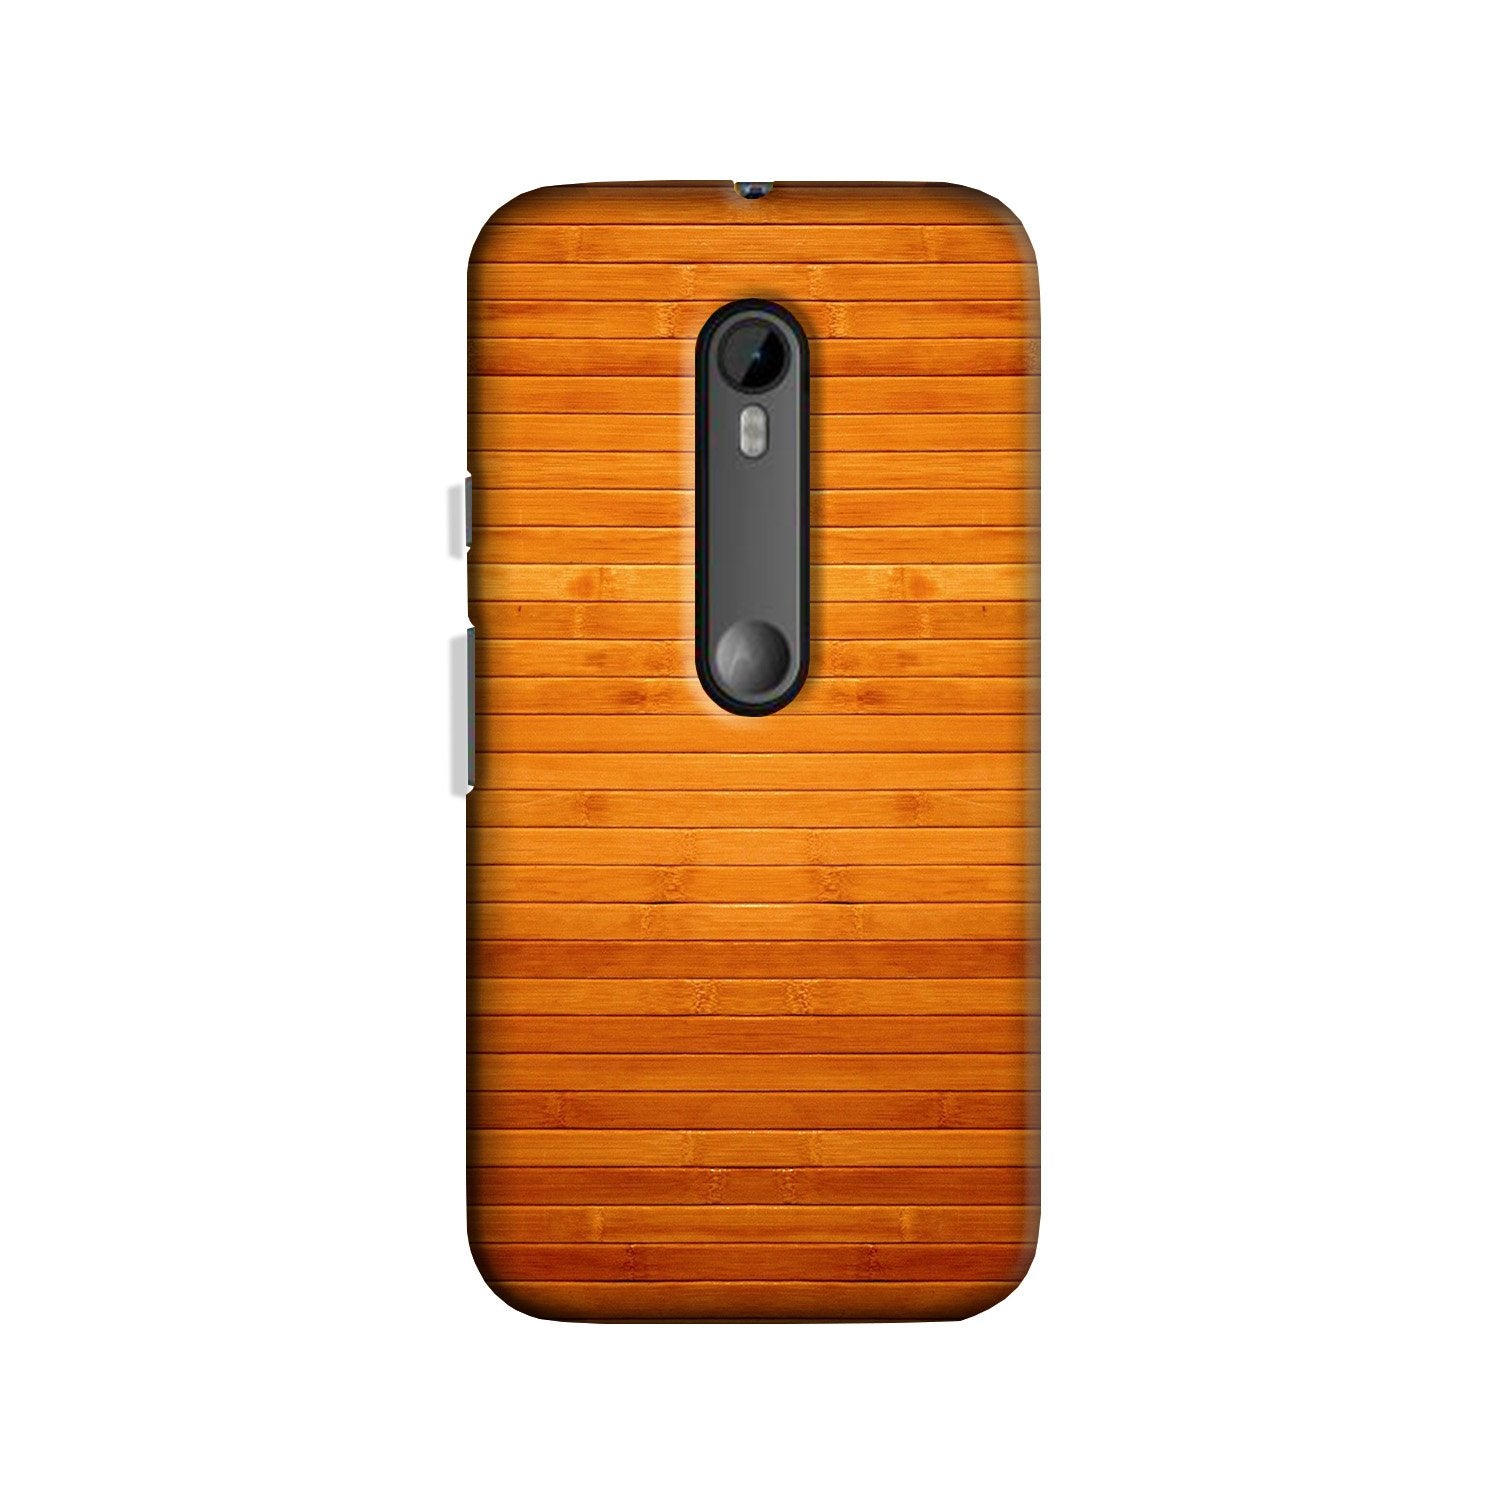 Wooden Look Case for Moto X Force  (Design - 111)